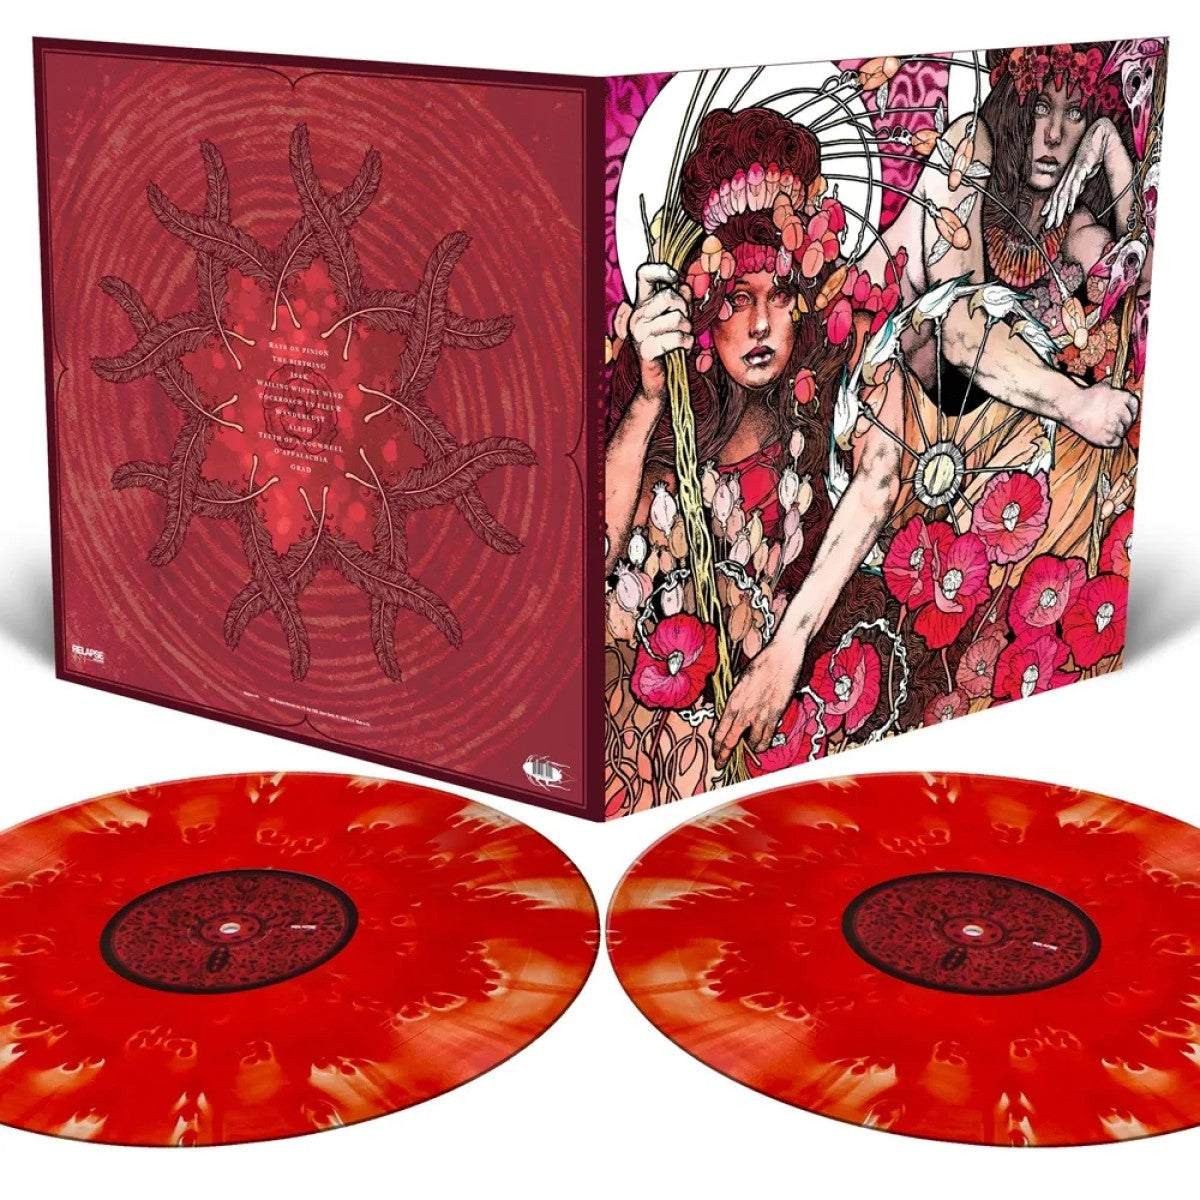 Baroness "The Red Album" Gatefold 2x12" Blood Red Cloudy Vinyl